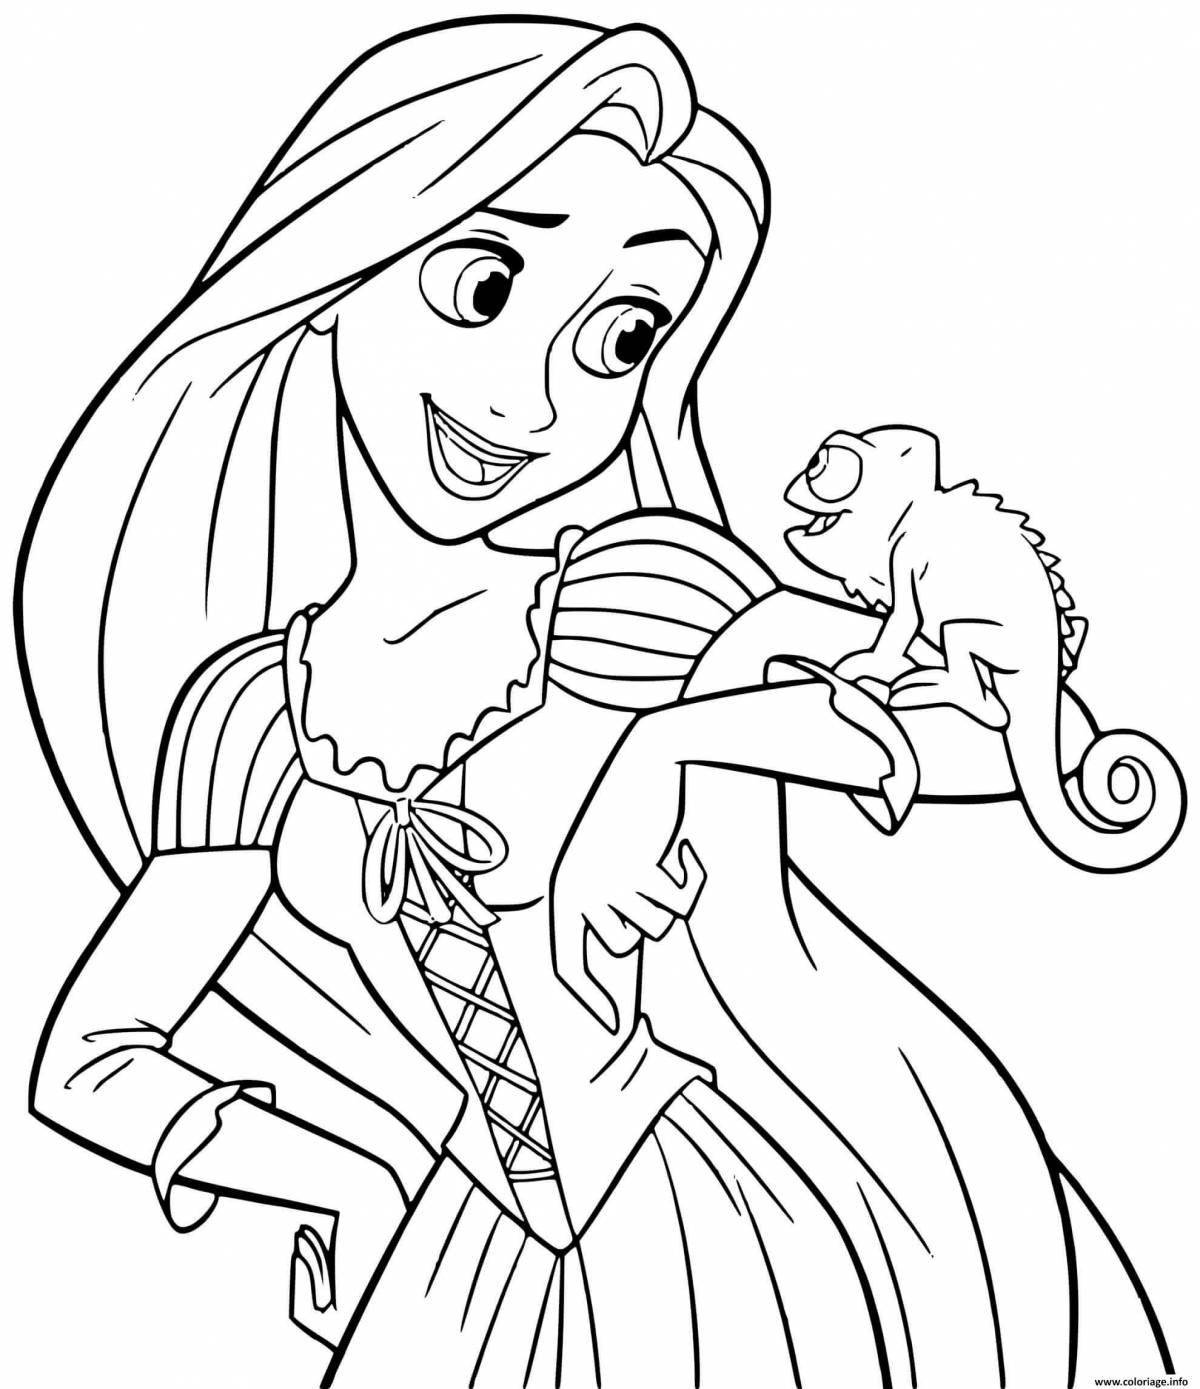 Charming rapunzel coloring book with clothes